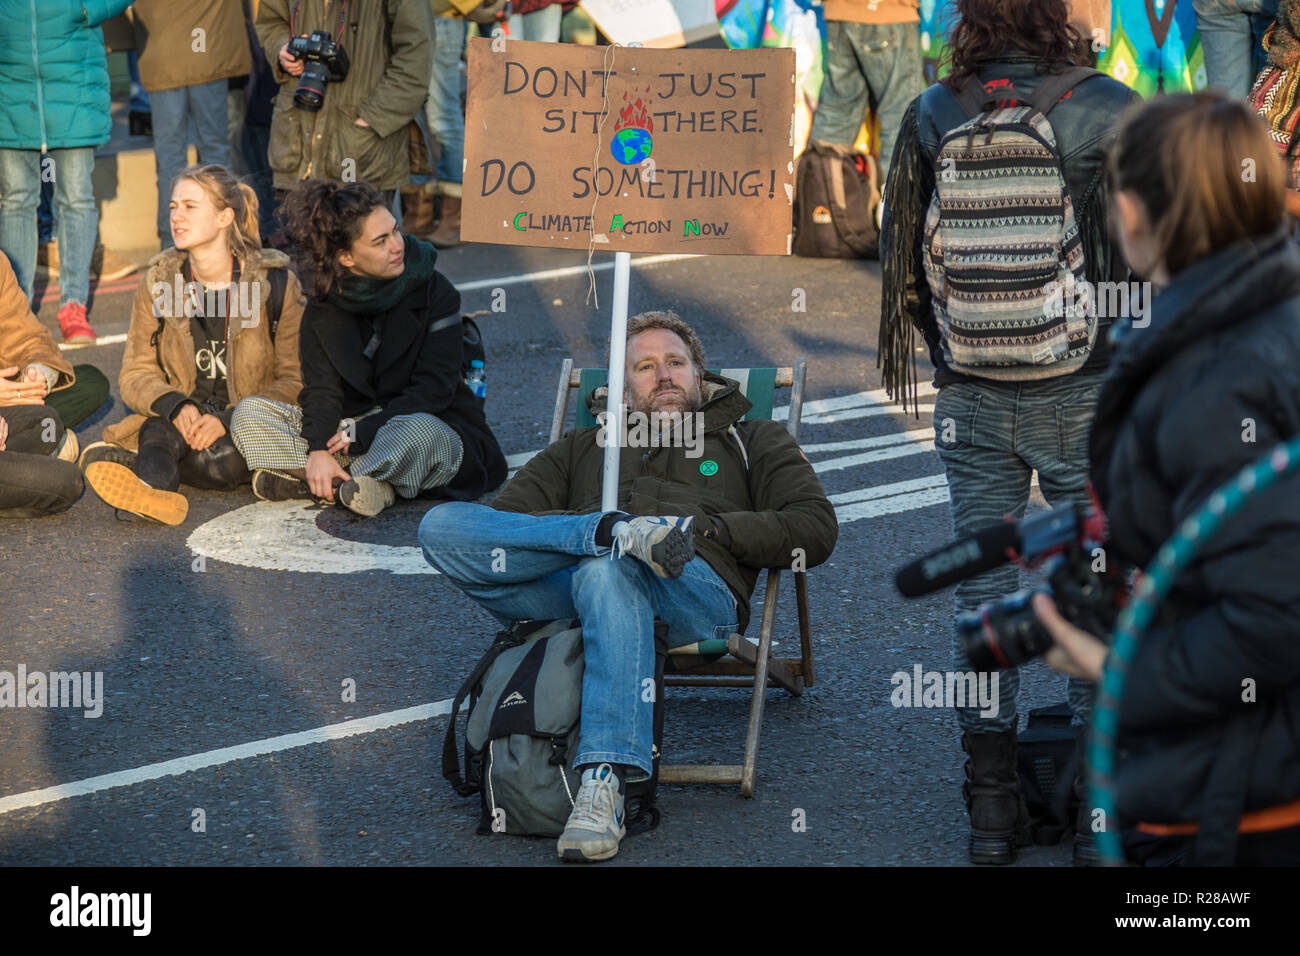 London, UK. 17th Nov, 2018. Westminster Bridge, climate protesters demonstrated in central London with a blockage of five London bridges. David Rowe/ Alamy Live News. Stock Photo